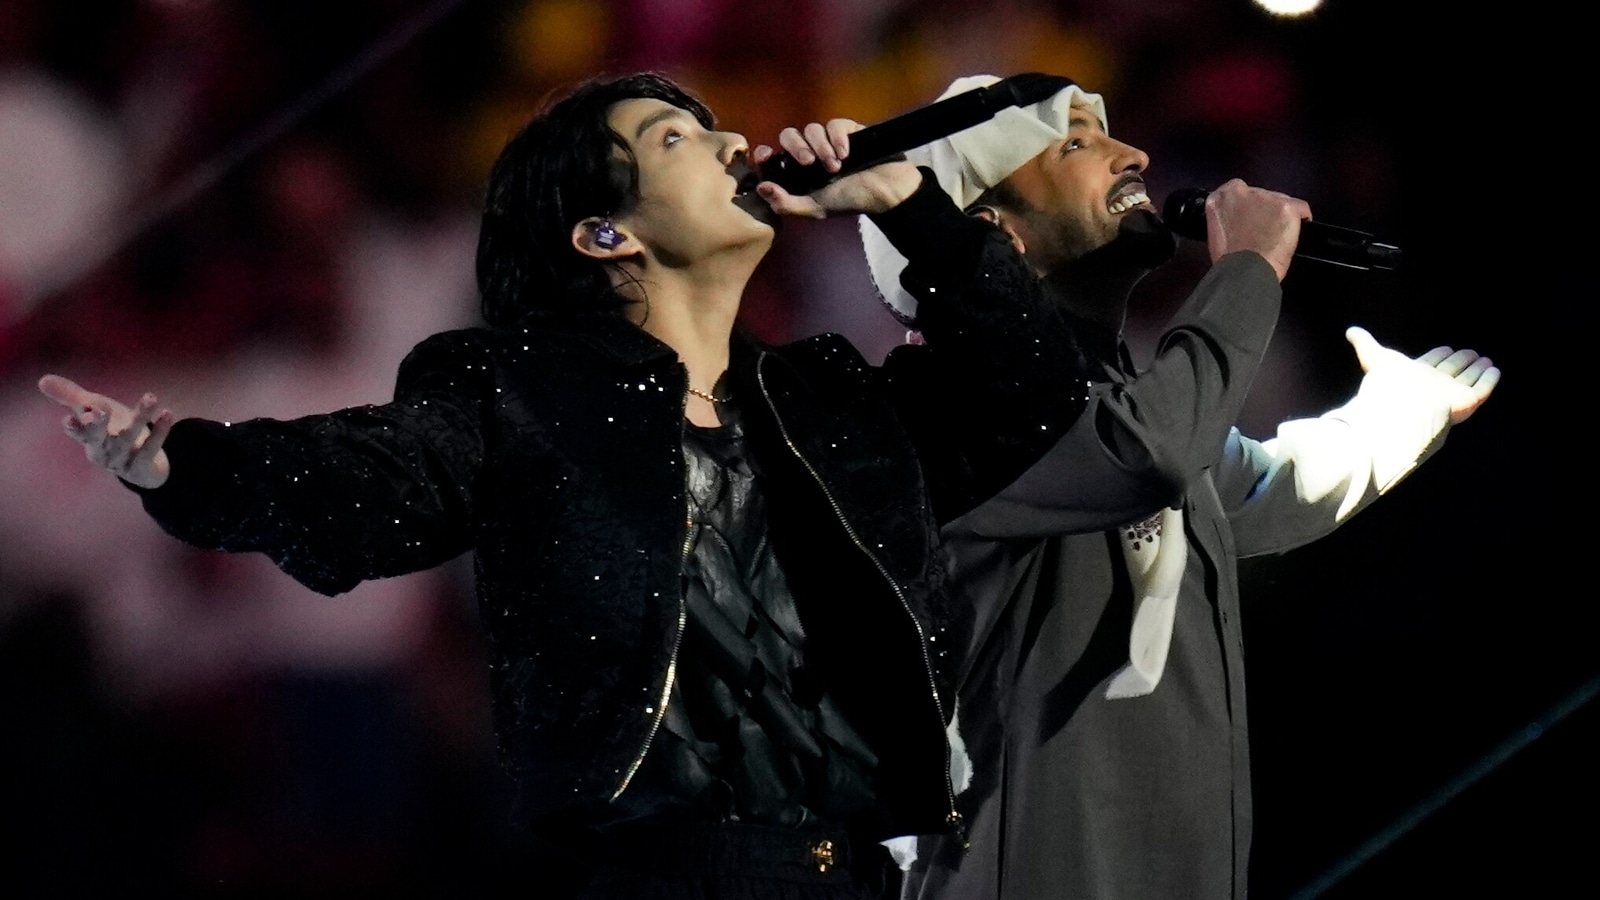 Jungkooks performance at FIFA World Cup opening wins hearts, BTS Army react